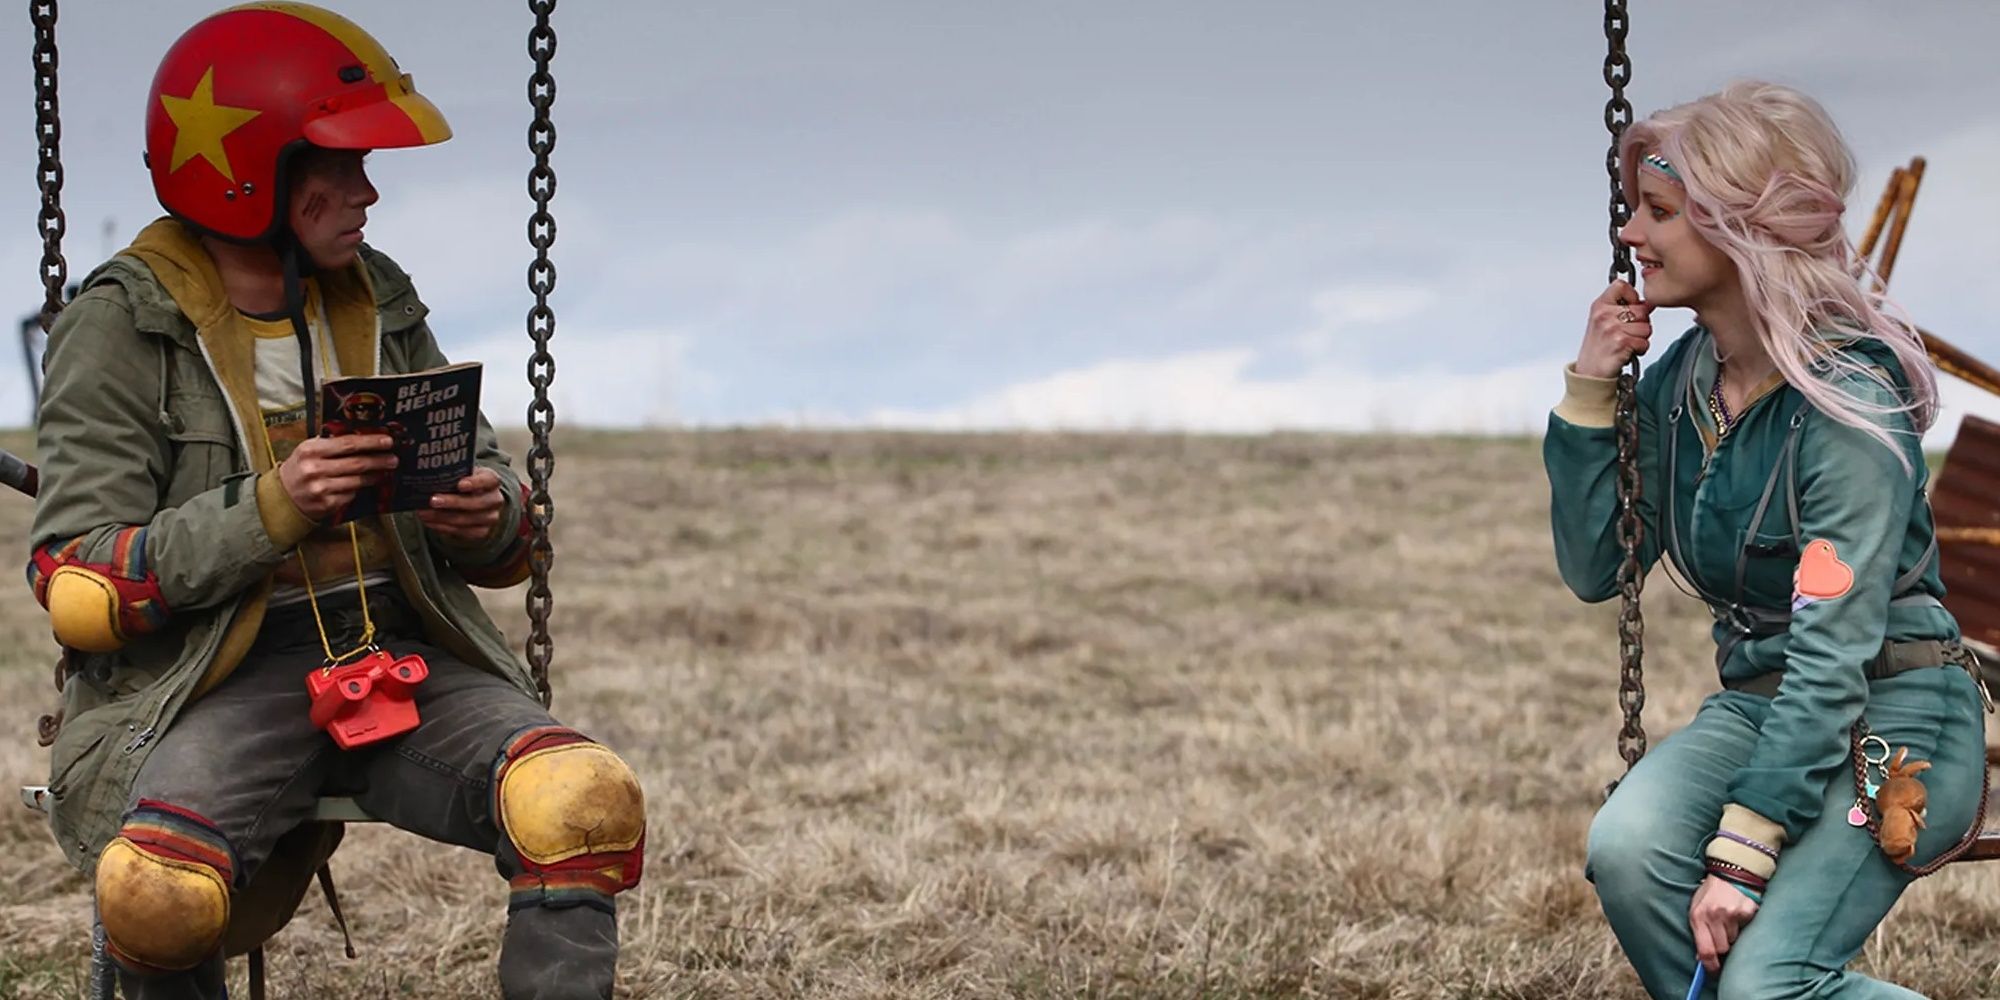 The Kid and Apple sit on a swing set in Turbo Kid